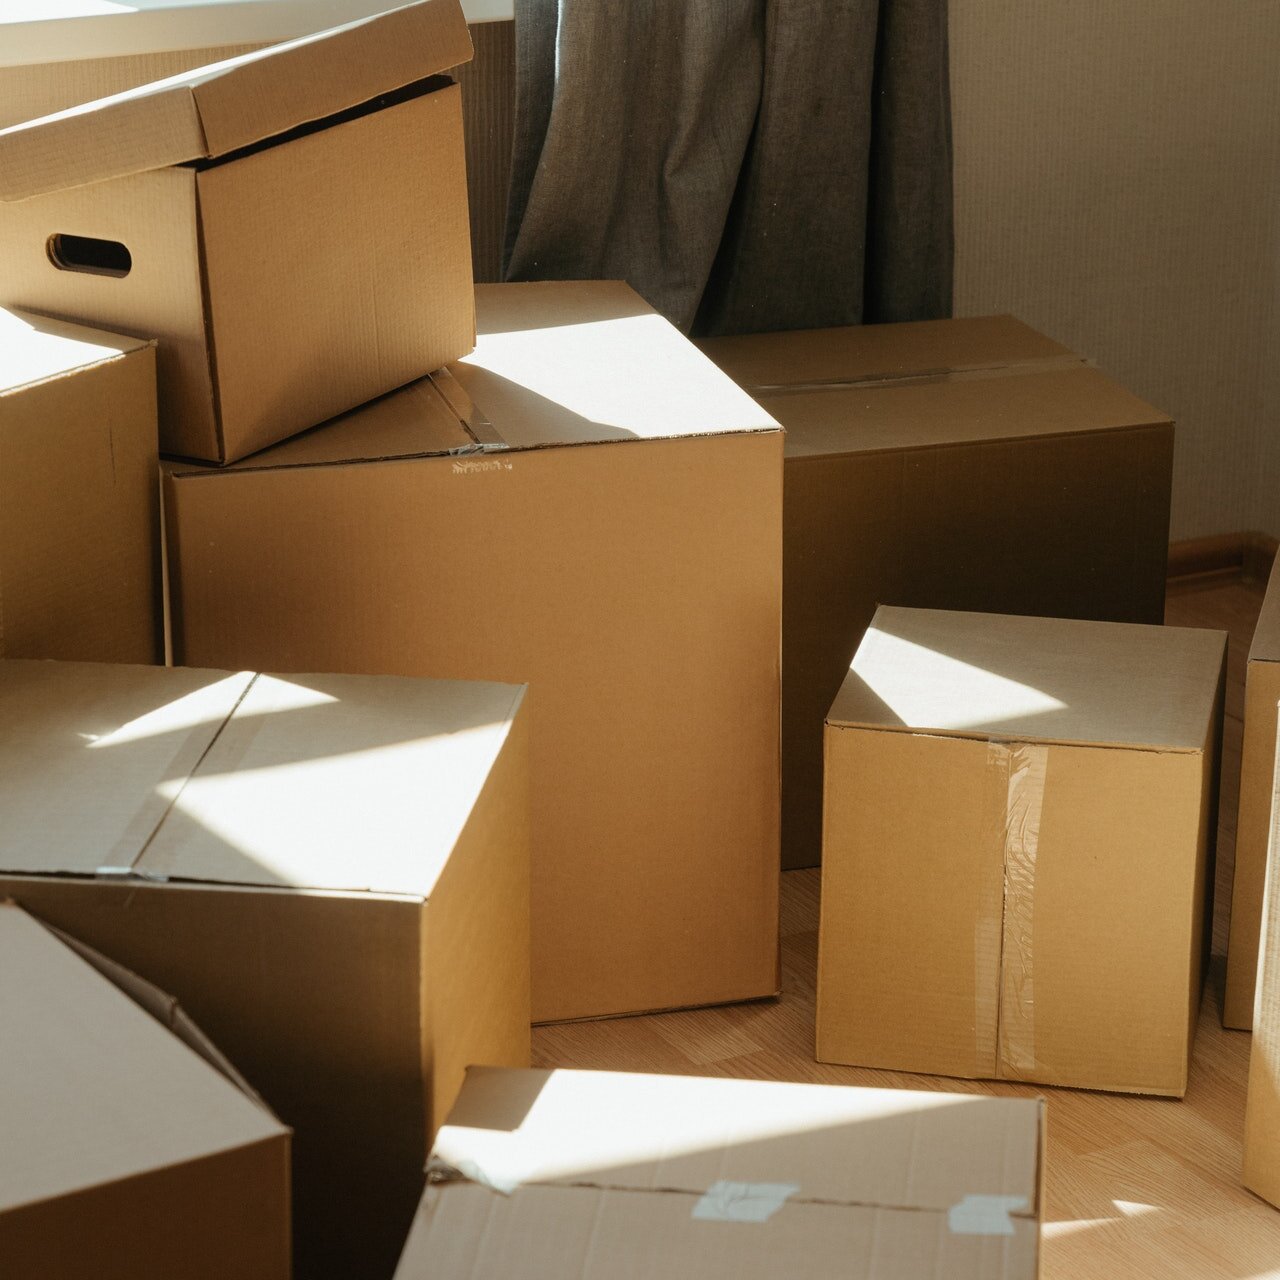 boxes in sunlight